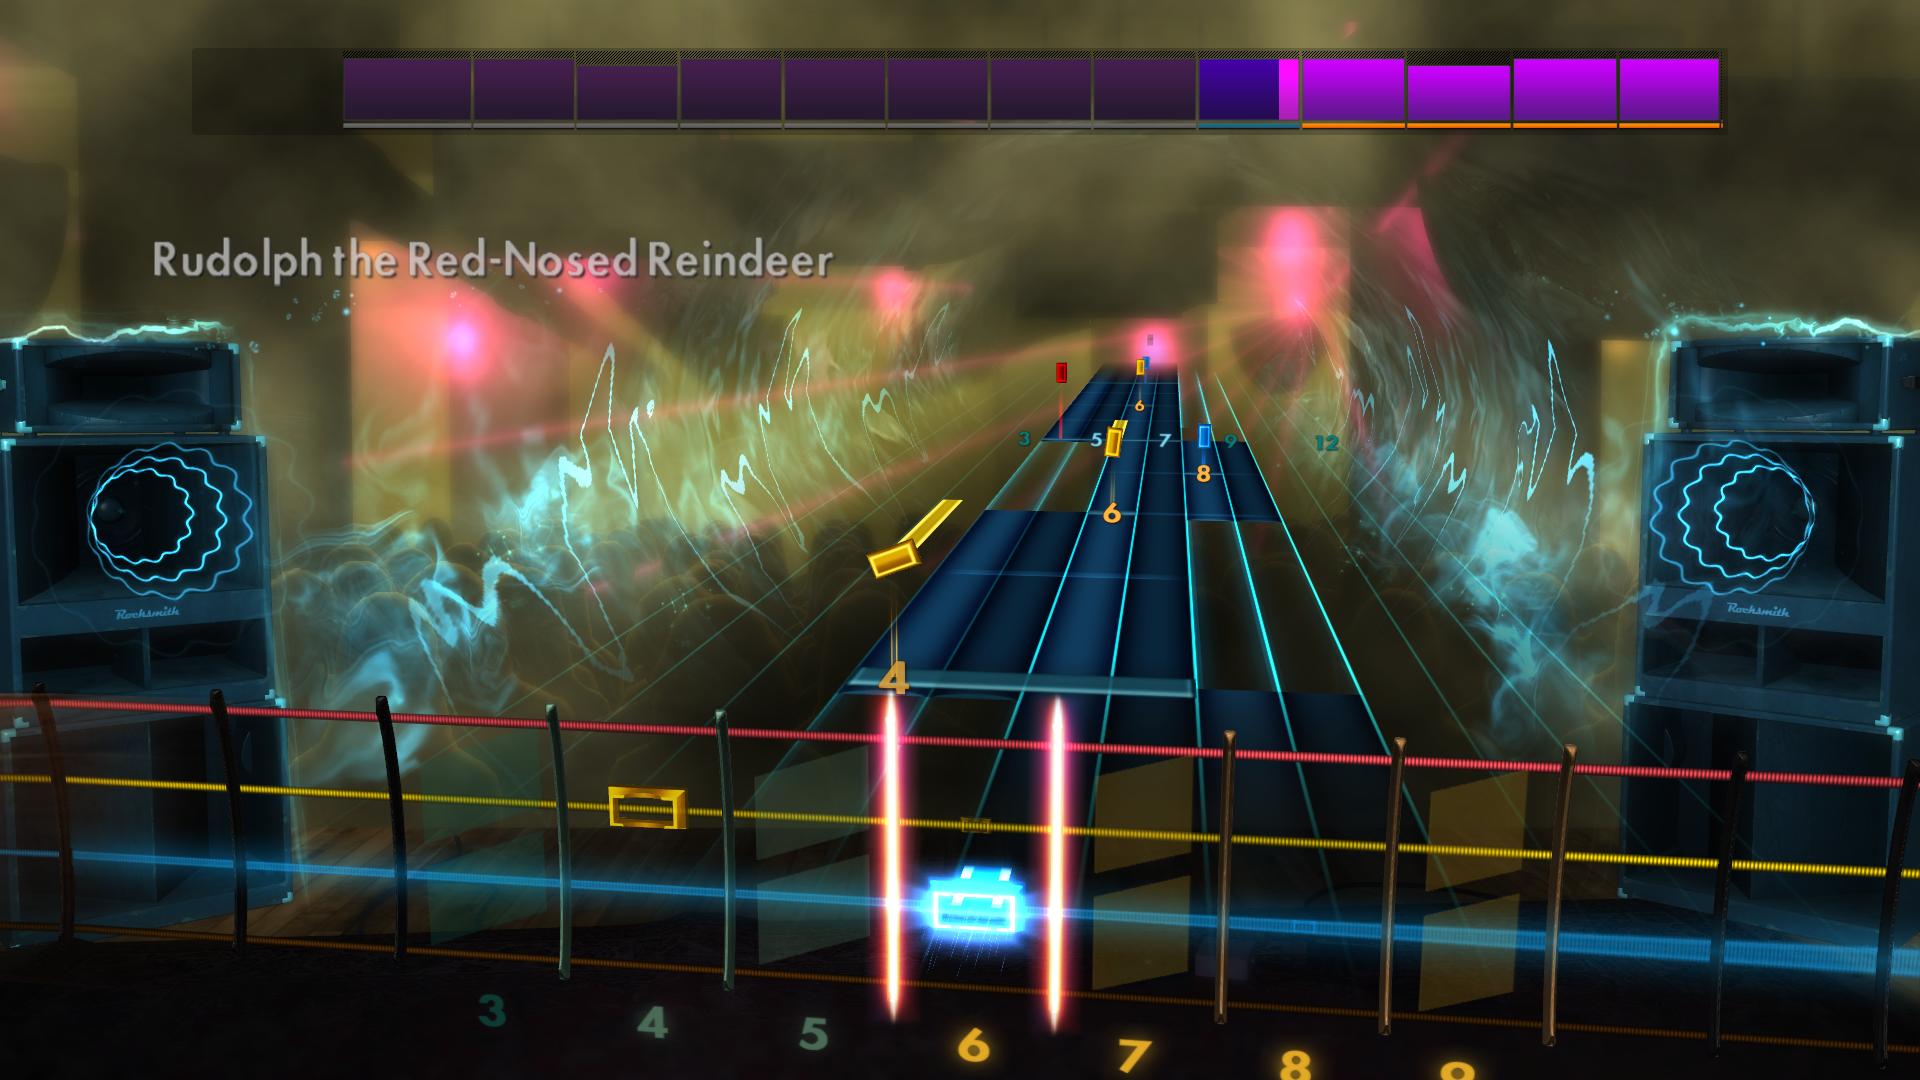 Rocksmith® 2014 Edition – Remastered – Gene Autry - “Rudolph the Red-Nosed Reindeer” Featured Screenshot #1